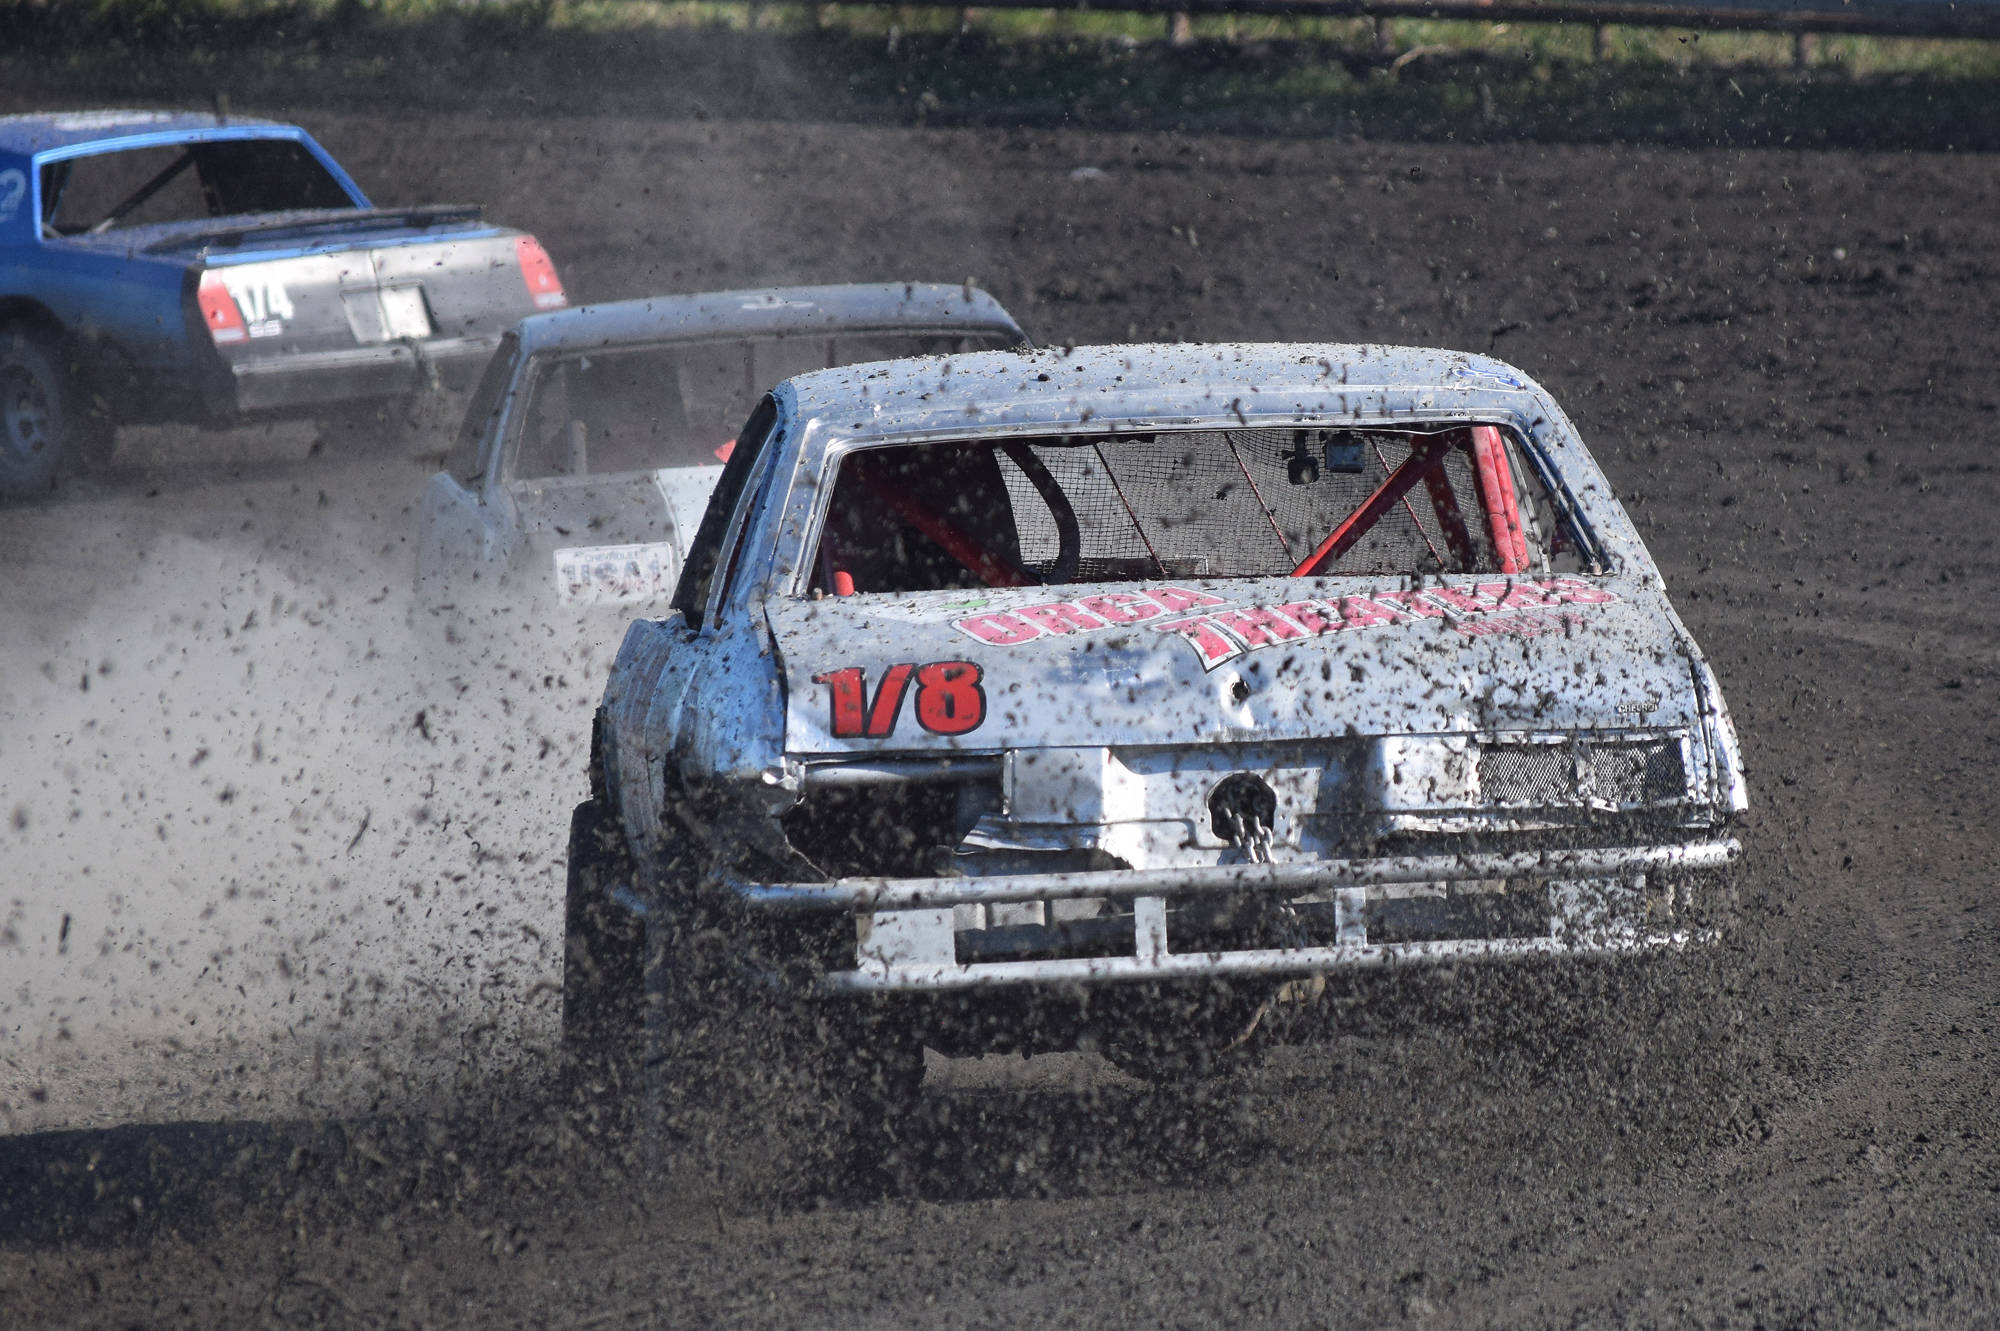 Chris Endsley’s A-Stock racer spits out a trail of dirt Saturday night at Twin City Raceway in Kenai. (Photo by Joey Klecka/Peninsula Clarion)